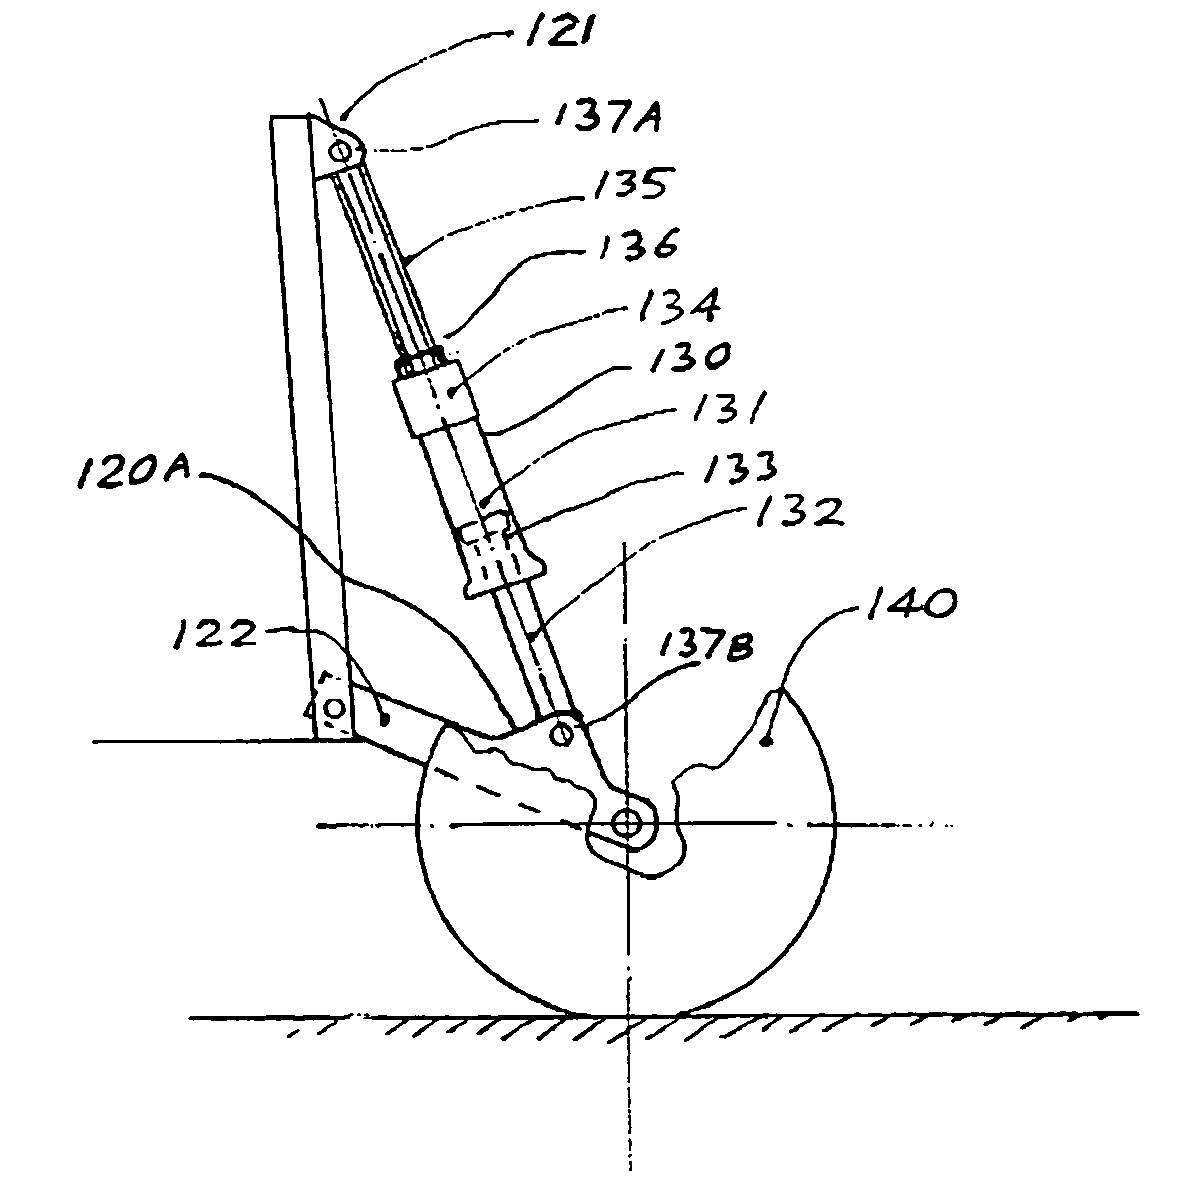 Aircraft landing gear with integrated extension, retraction, and leveling feature